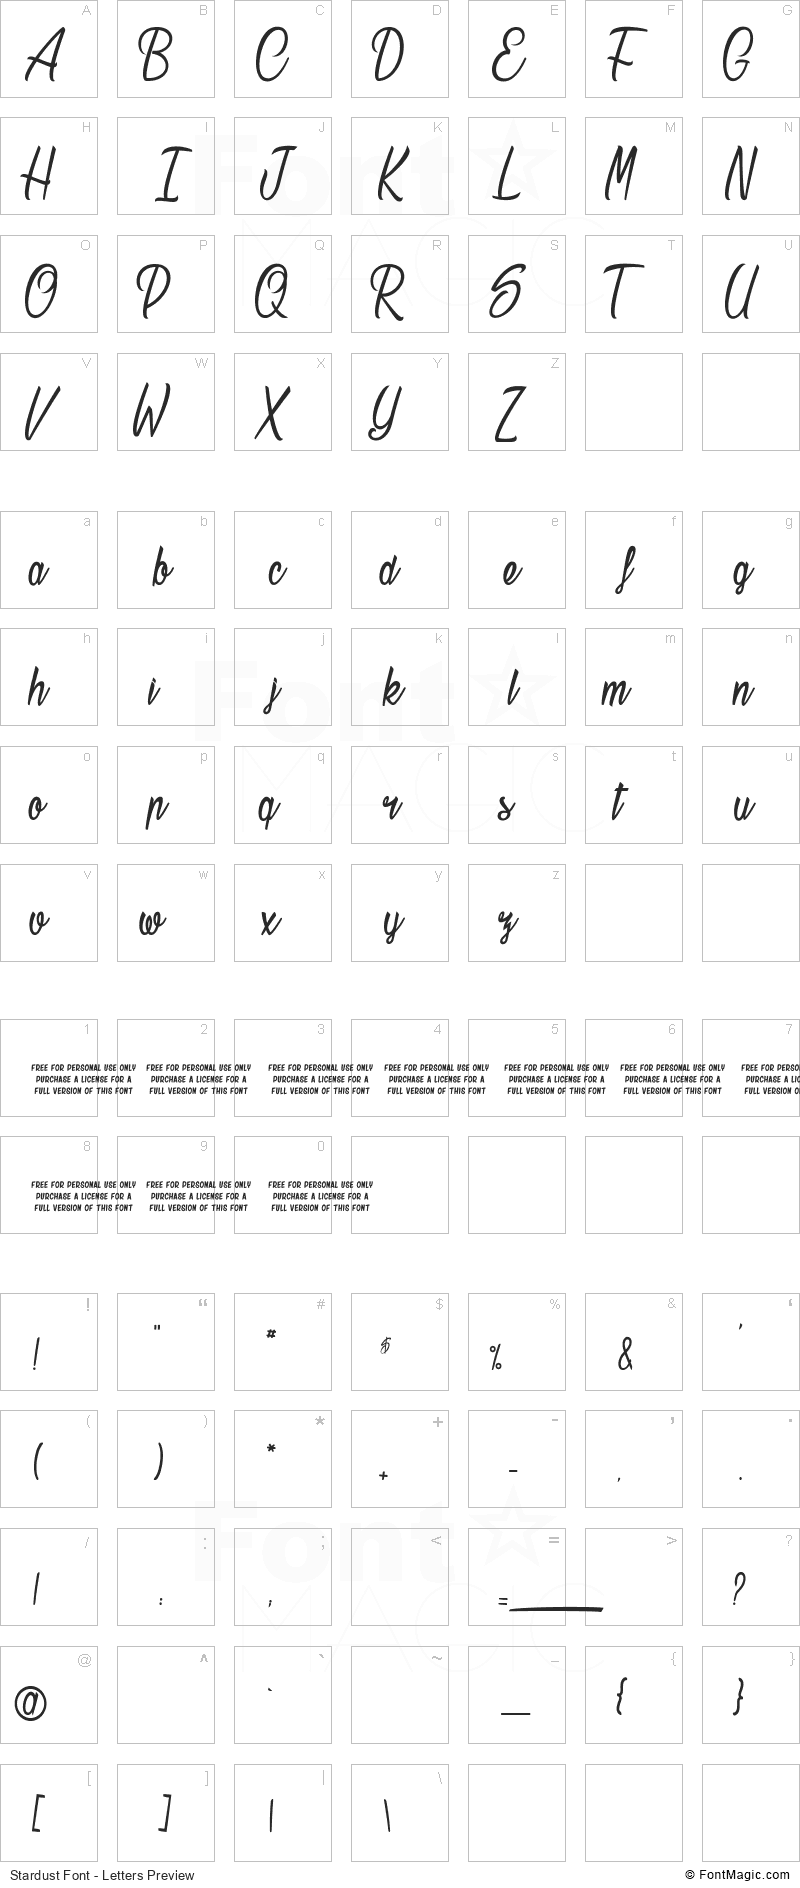 Stardust Font - All Latters Preview Chart